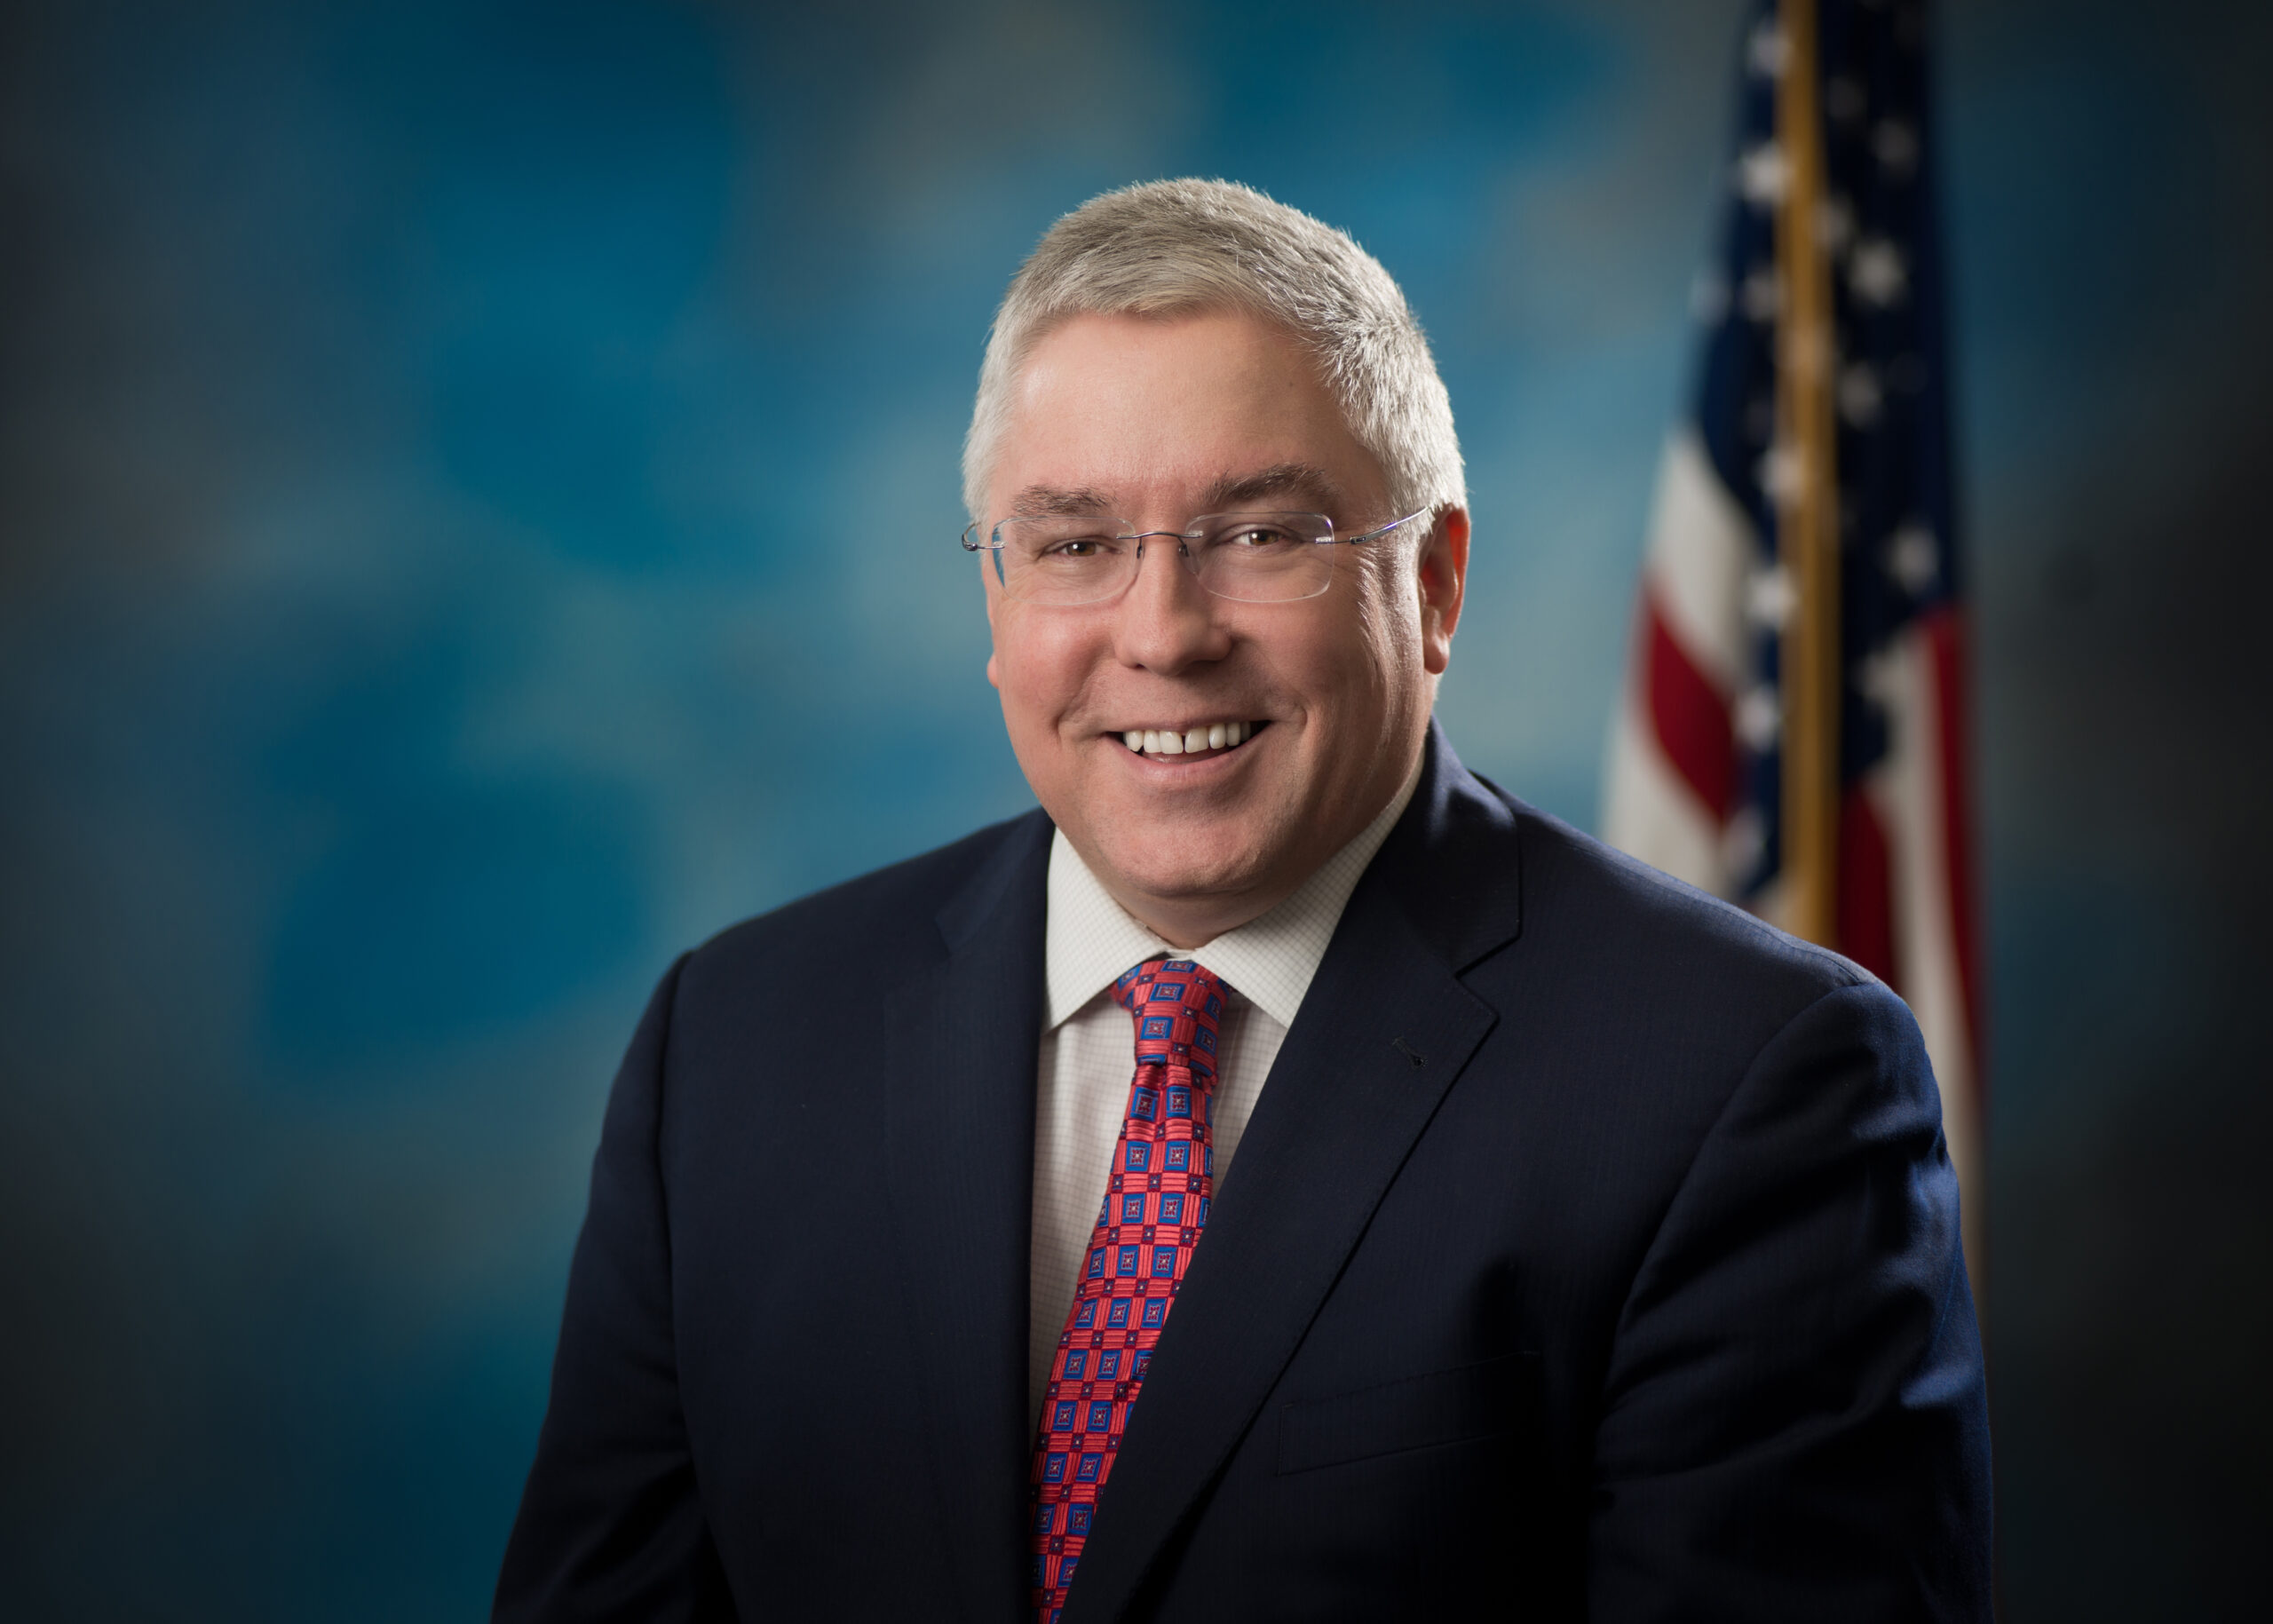 Patrick Morrisey for Governor